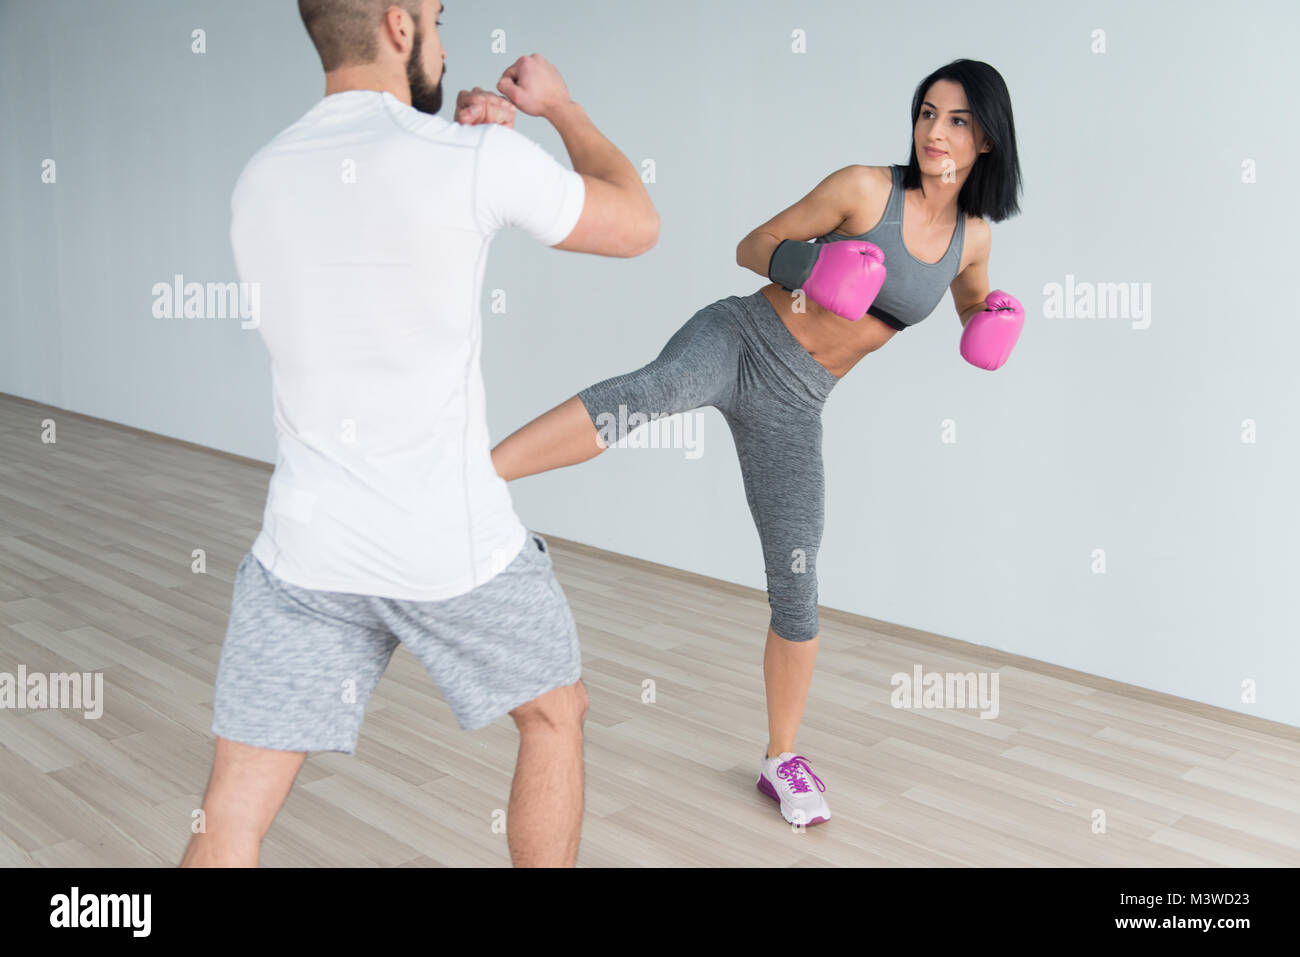 Woman Boxer MMA Fighter Practice Her Skills With Personal Trainer In Gym Stock Photo